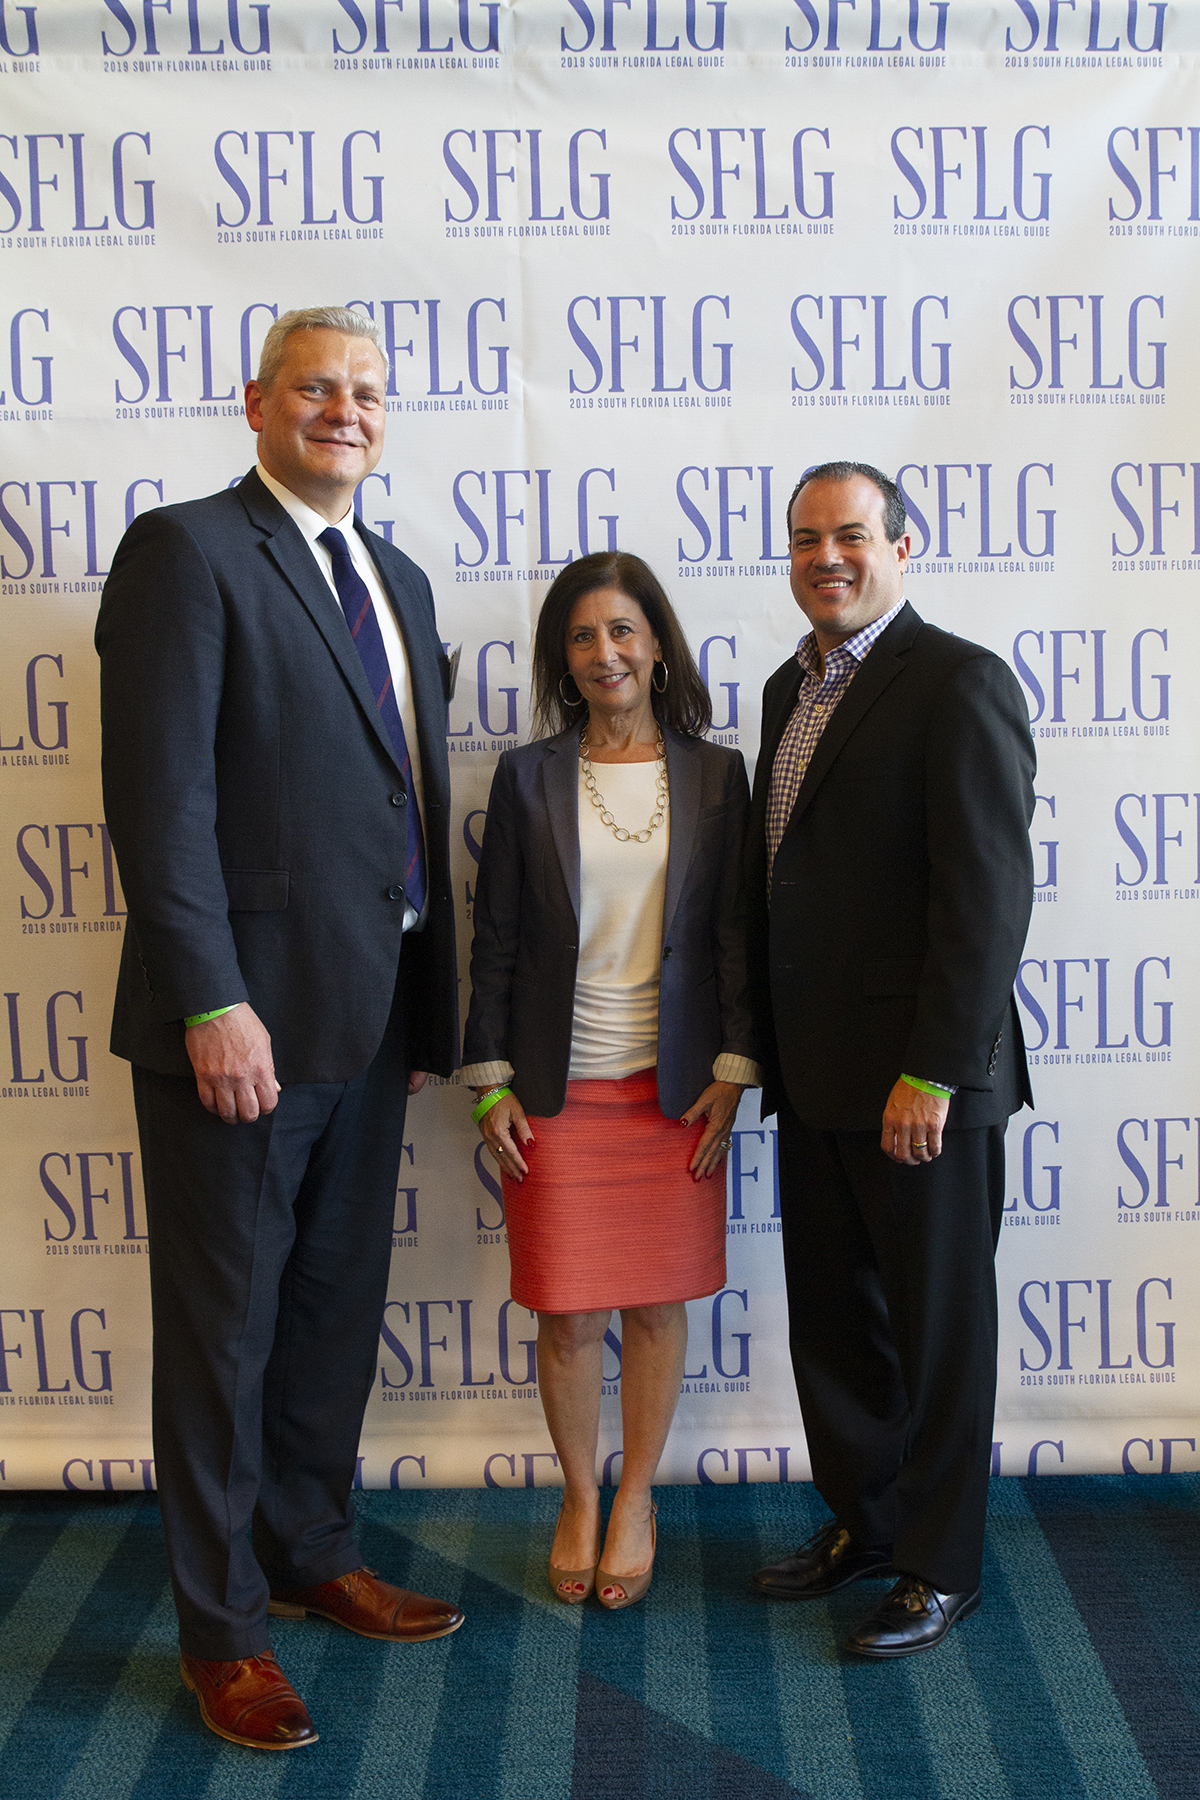 Leaders from North Broward Preparatory School, which sponsored the event: Boarding Admissions Manager Mike Rodgers, Head of School Elise R. Ecoff and Chairman Adam Marshall of Marshall Grant PLC